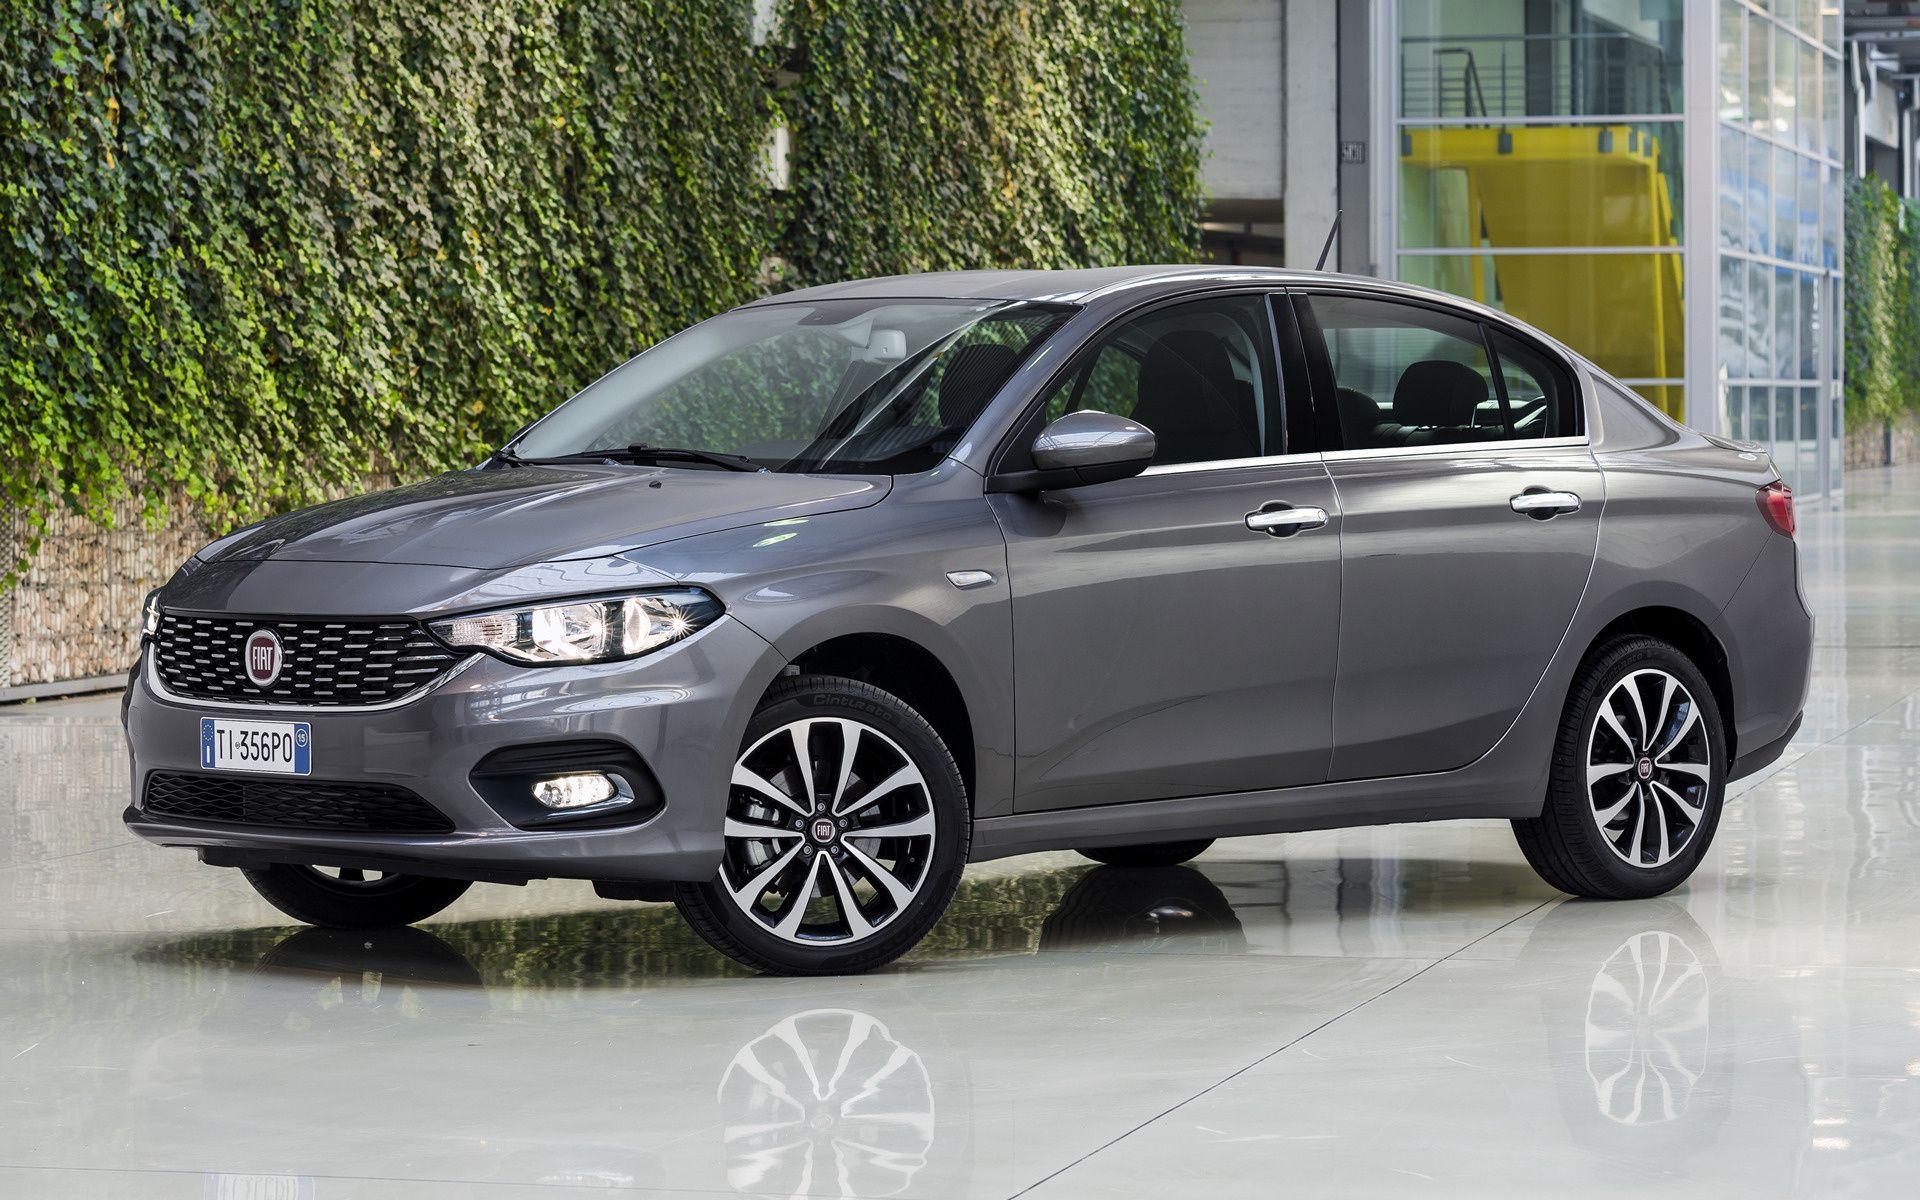 Fiat Tipo (2015) Wallpaper and HD Image